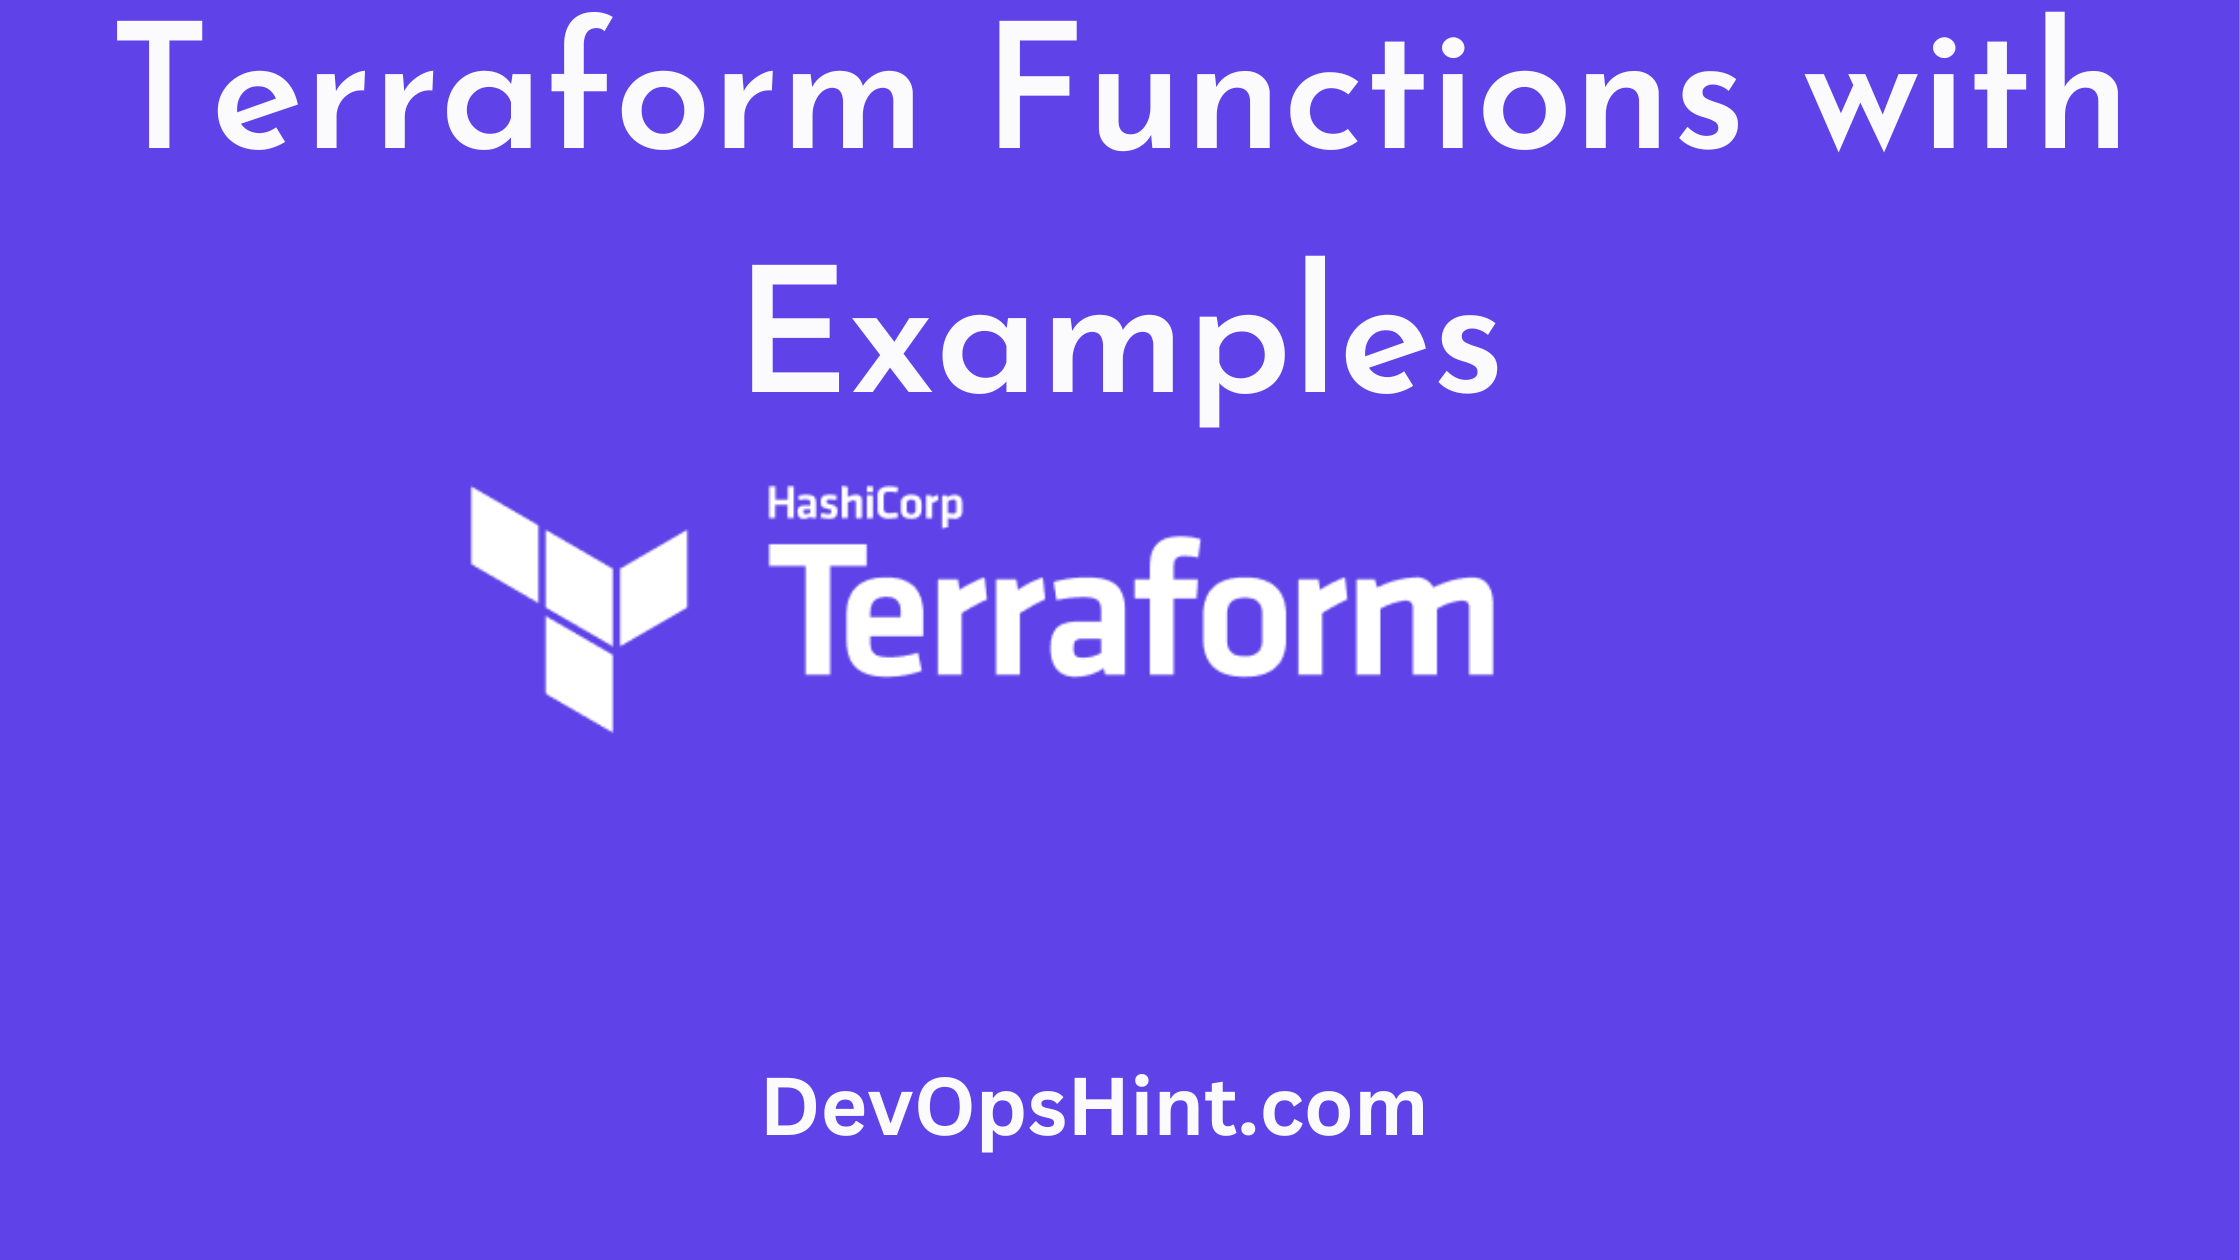 Terraform Functions with Examples